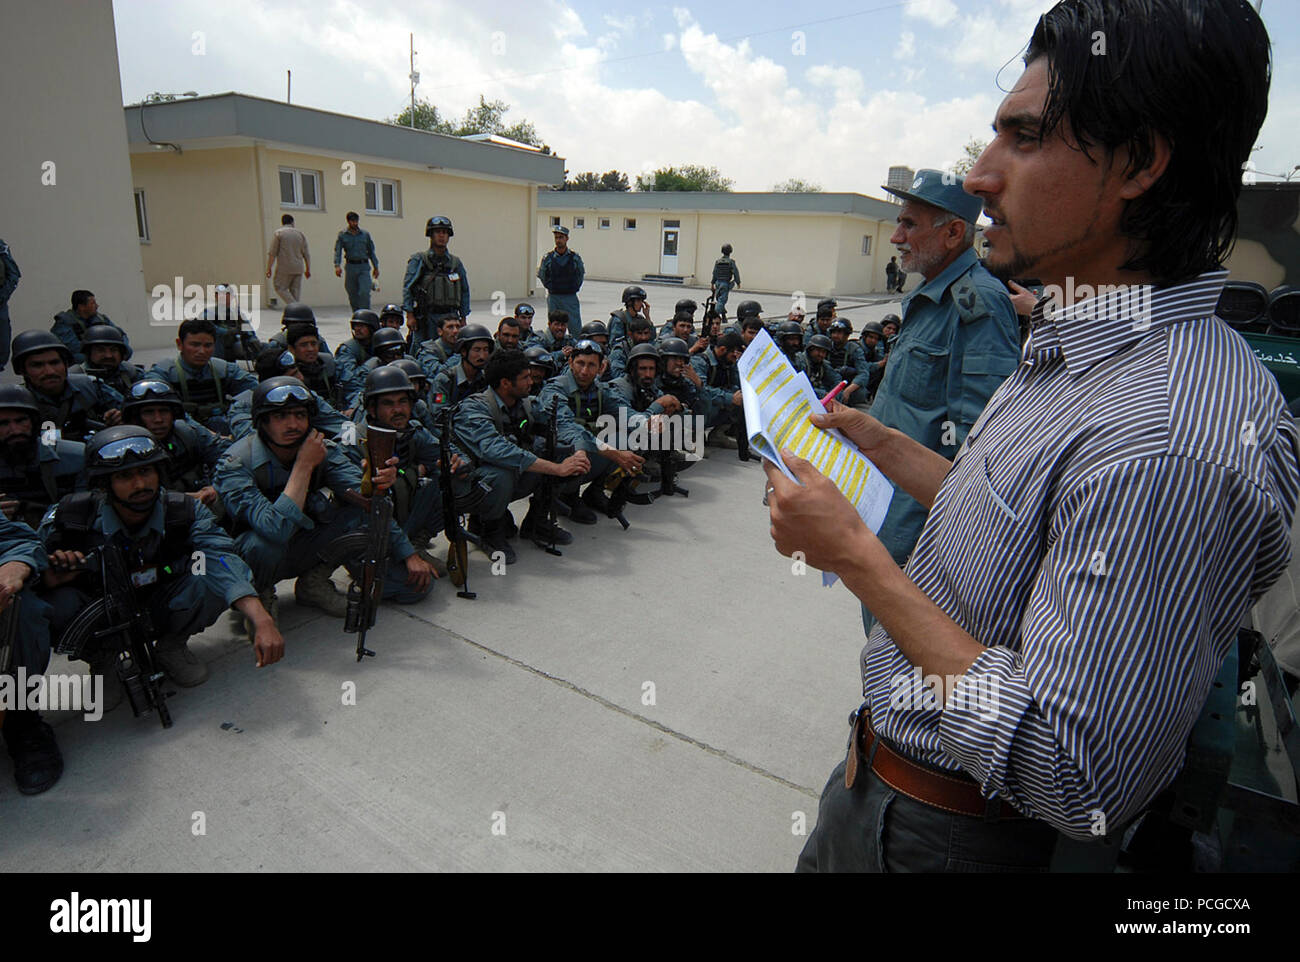 KABUL, Afghanistan (April 18, 2010) – Afghan translator Esmatullah Ebrahimkhail, right,  calls names of members of the Afghan National Civil Order Police (ANCOP), at a Kabul facility.  The police officers registered and received briefings and training as they prepare for operations in Afghanistan. (US Navy Stock Photo